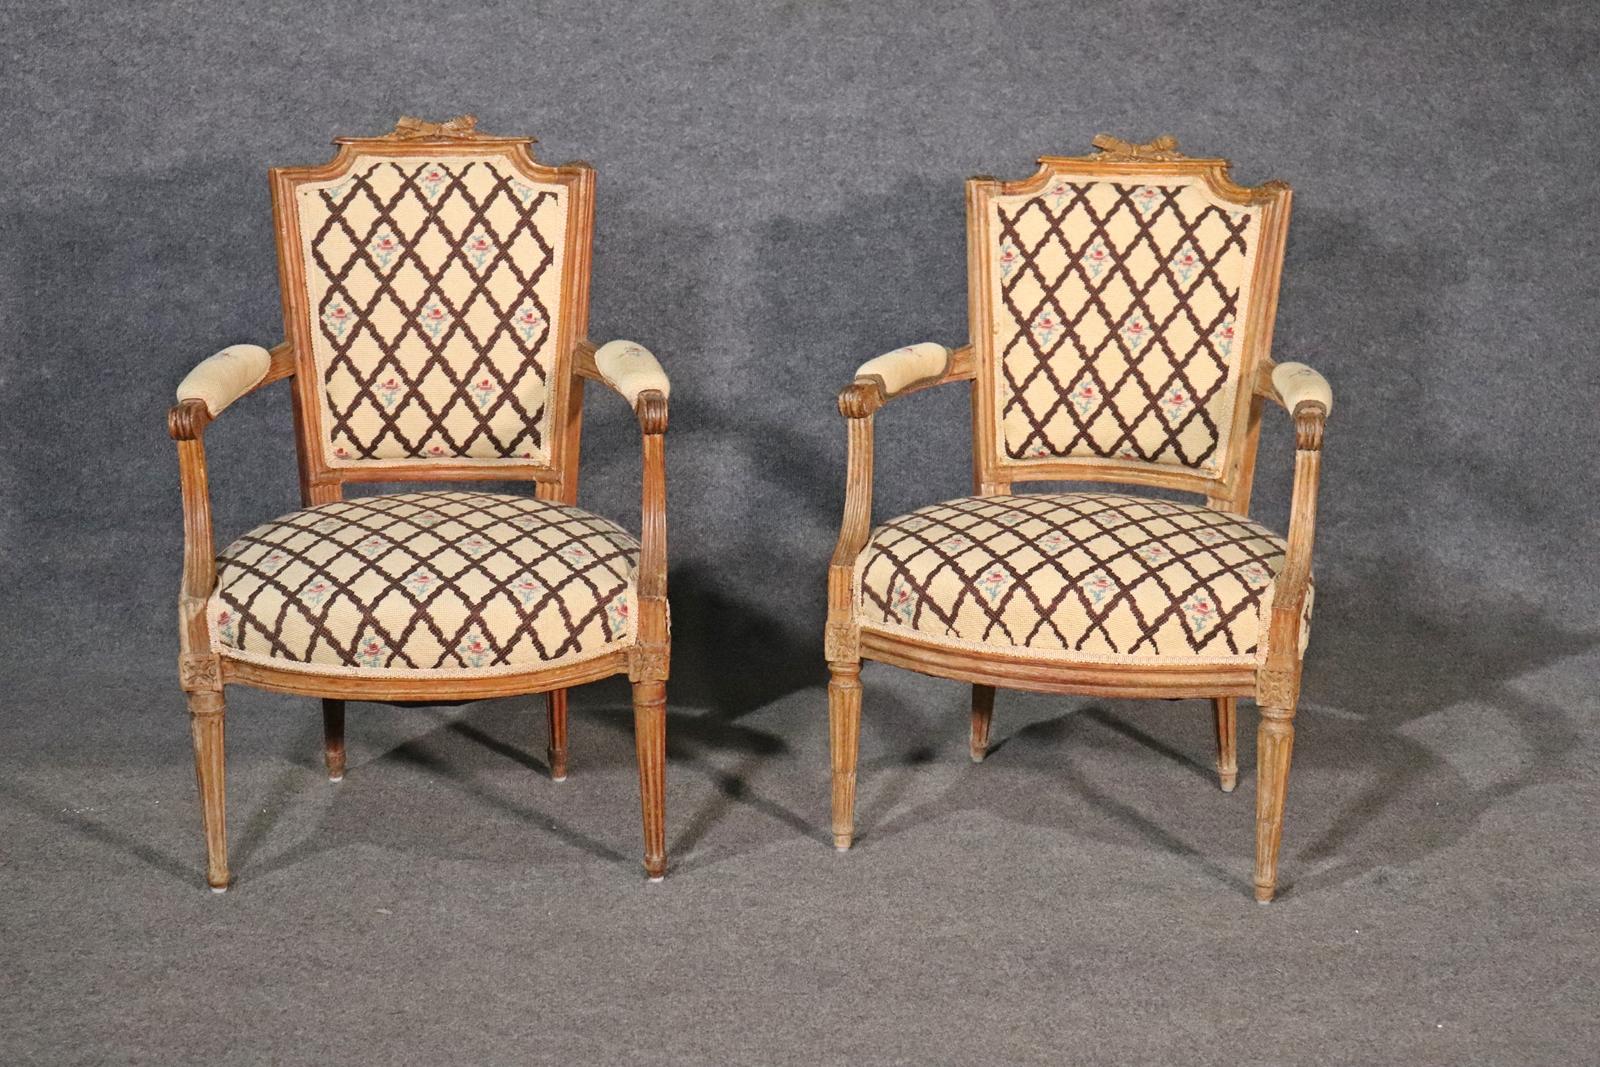 Carved wood frame and legs. Upholstered seat, back and arms. Measures: 34